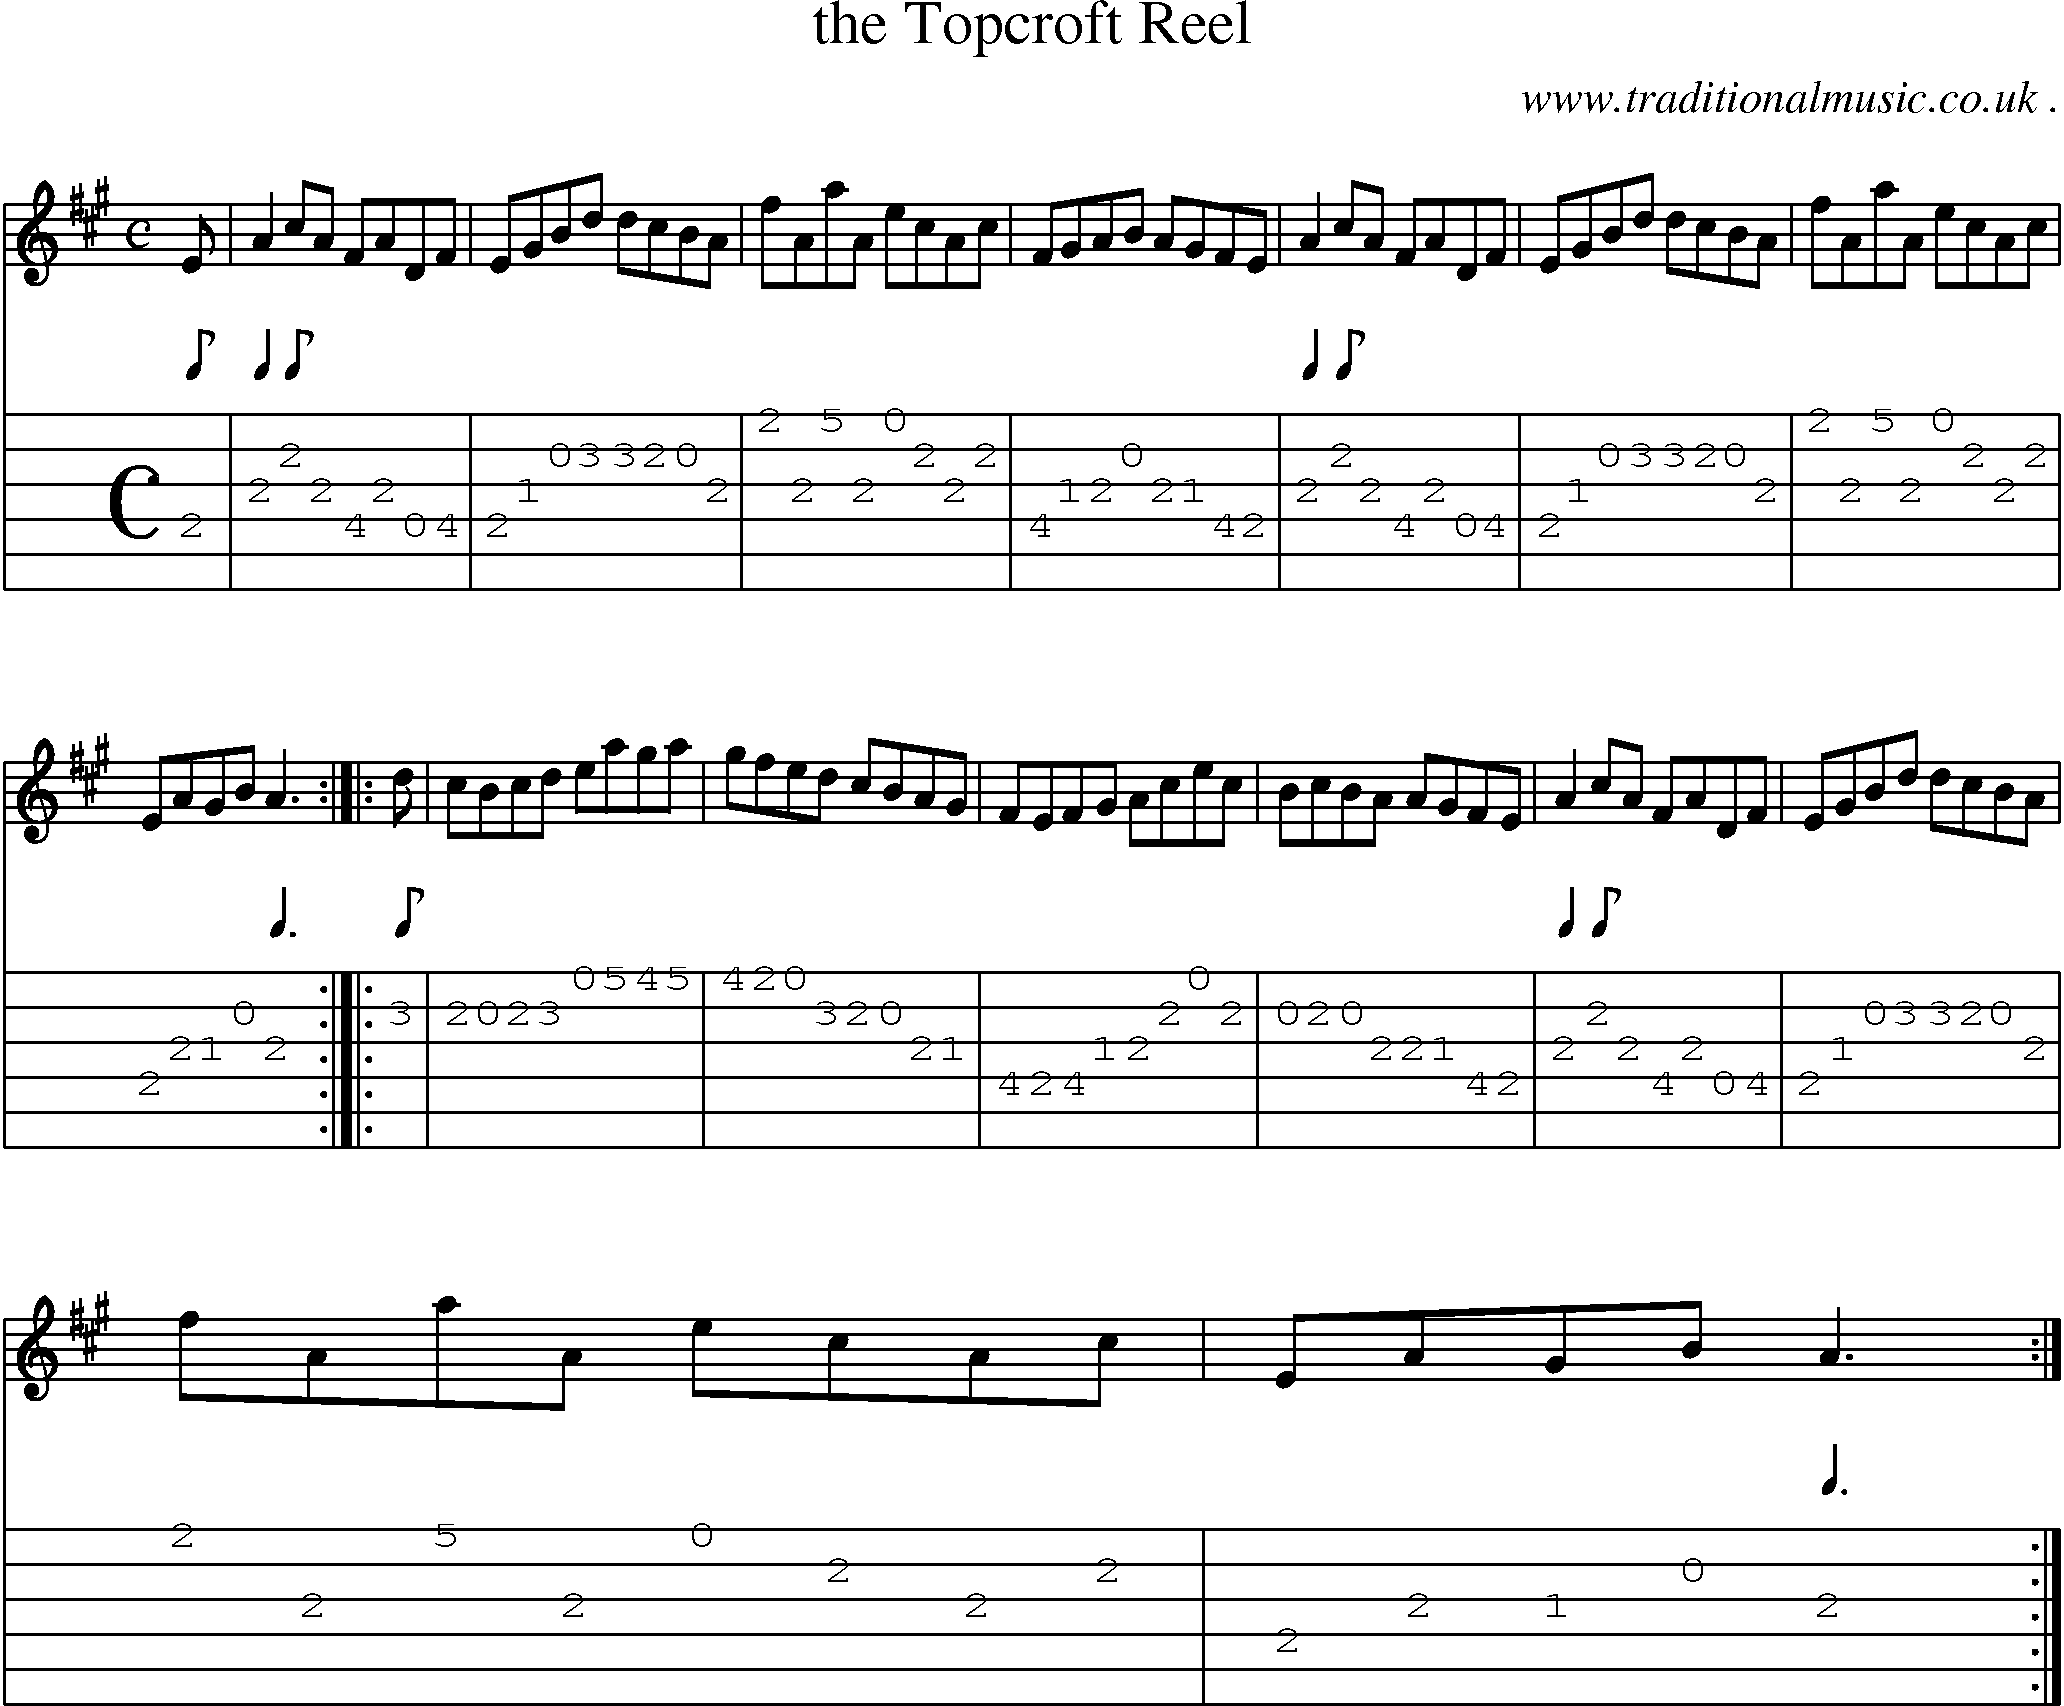 Sheet-Music and Guitar Tabs for The Topcroft Reel